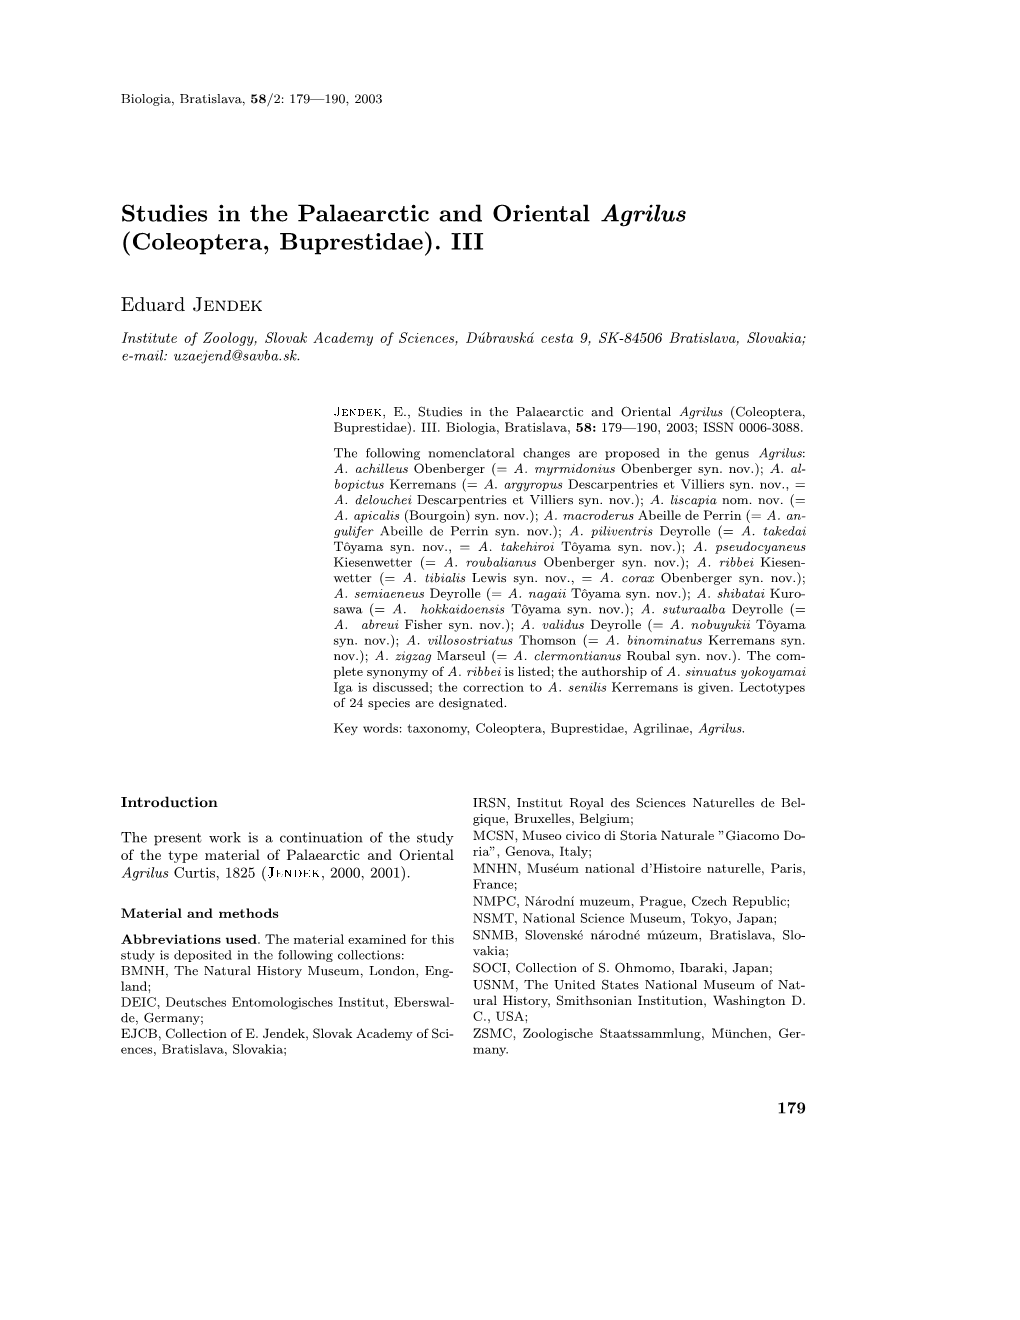 Studies in the Palaearctic and Oriental Agrilus (Coleoptera, Buprestidae). III